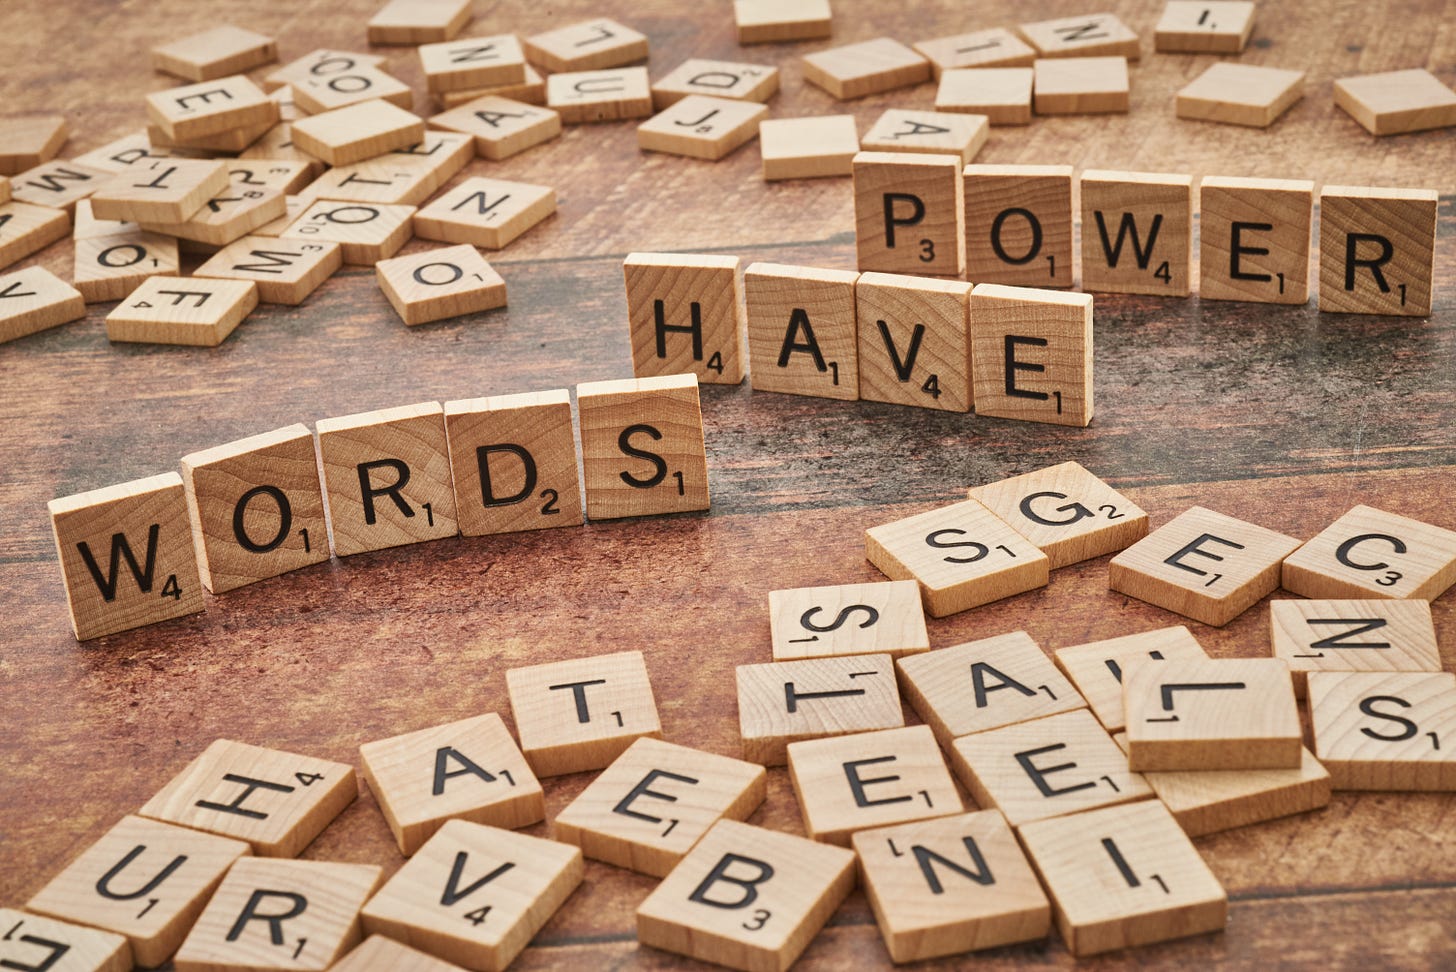 Scrabble tiles spelling out "Words Have Power"